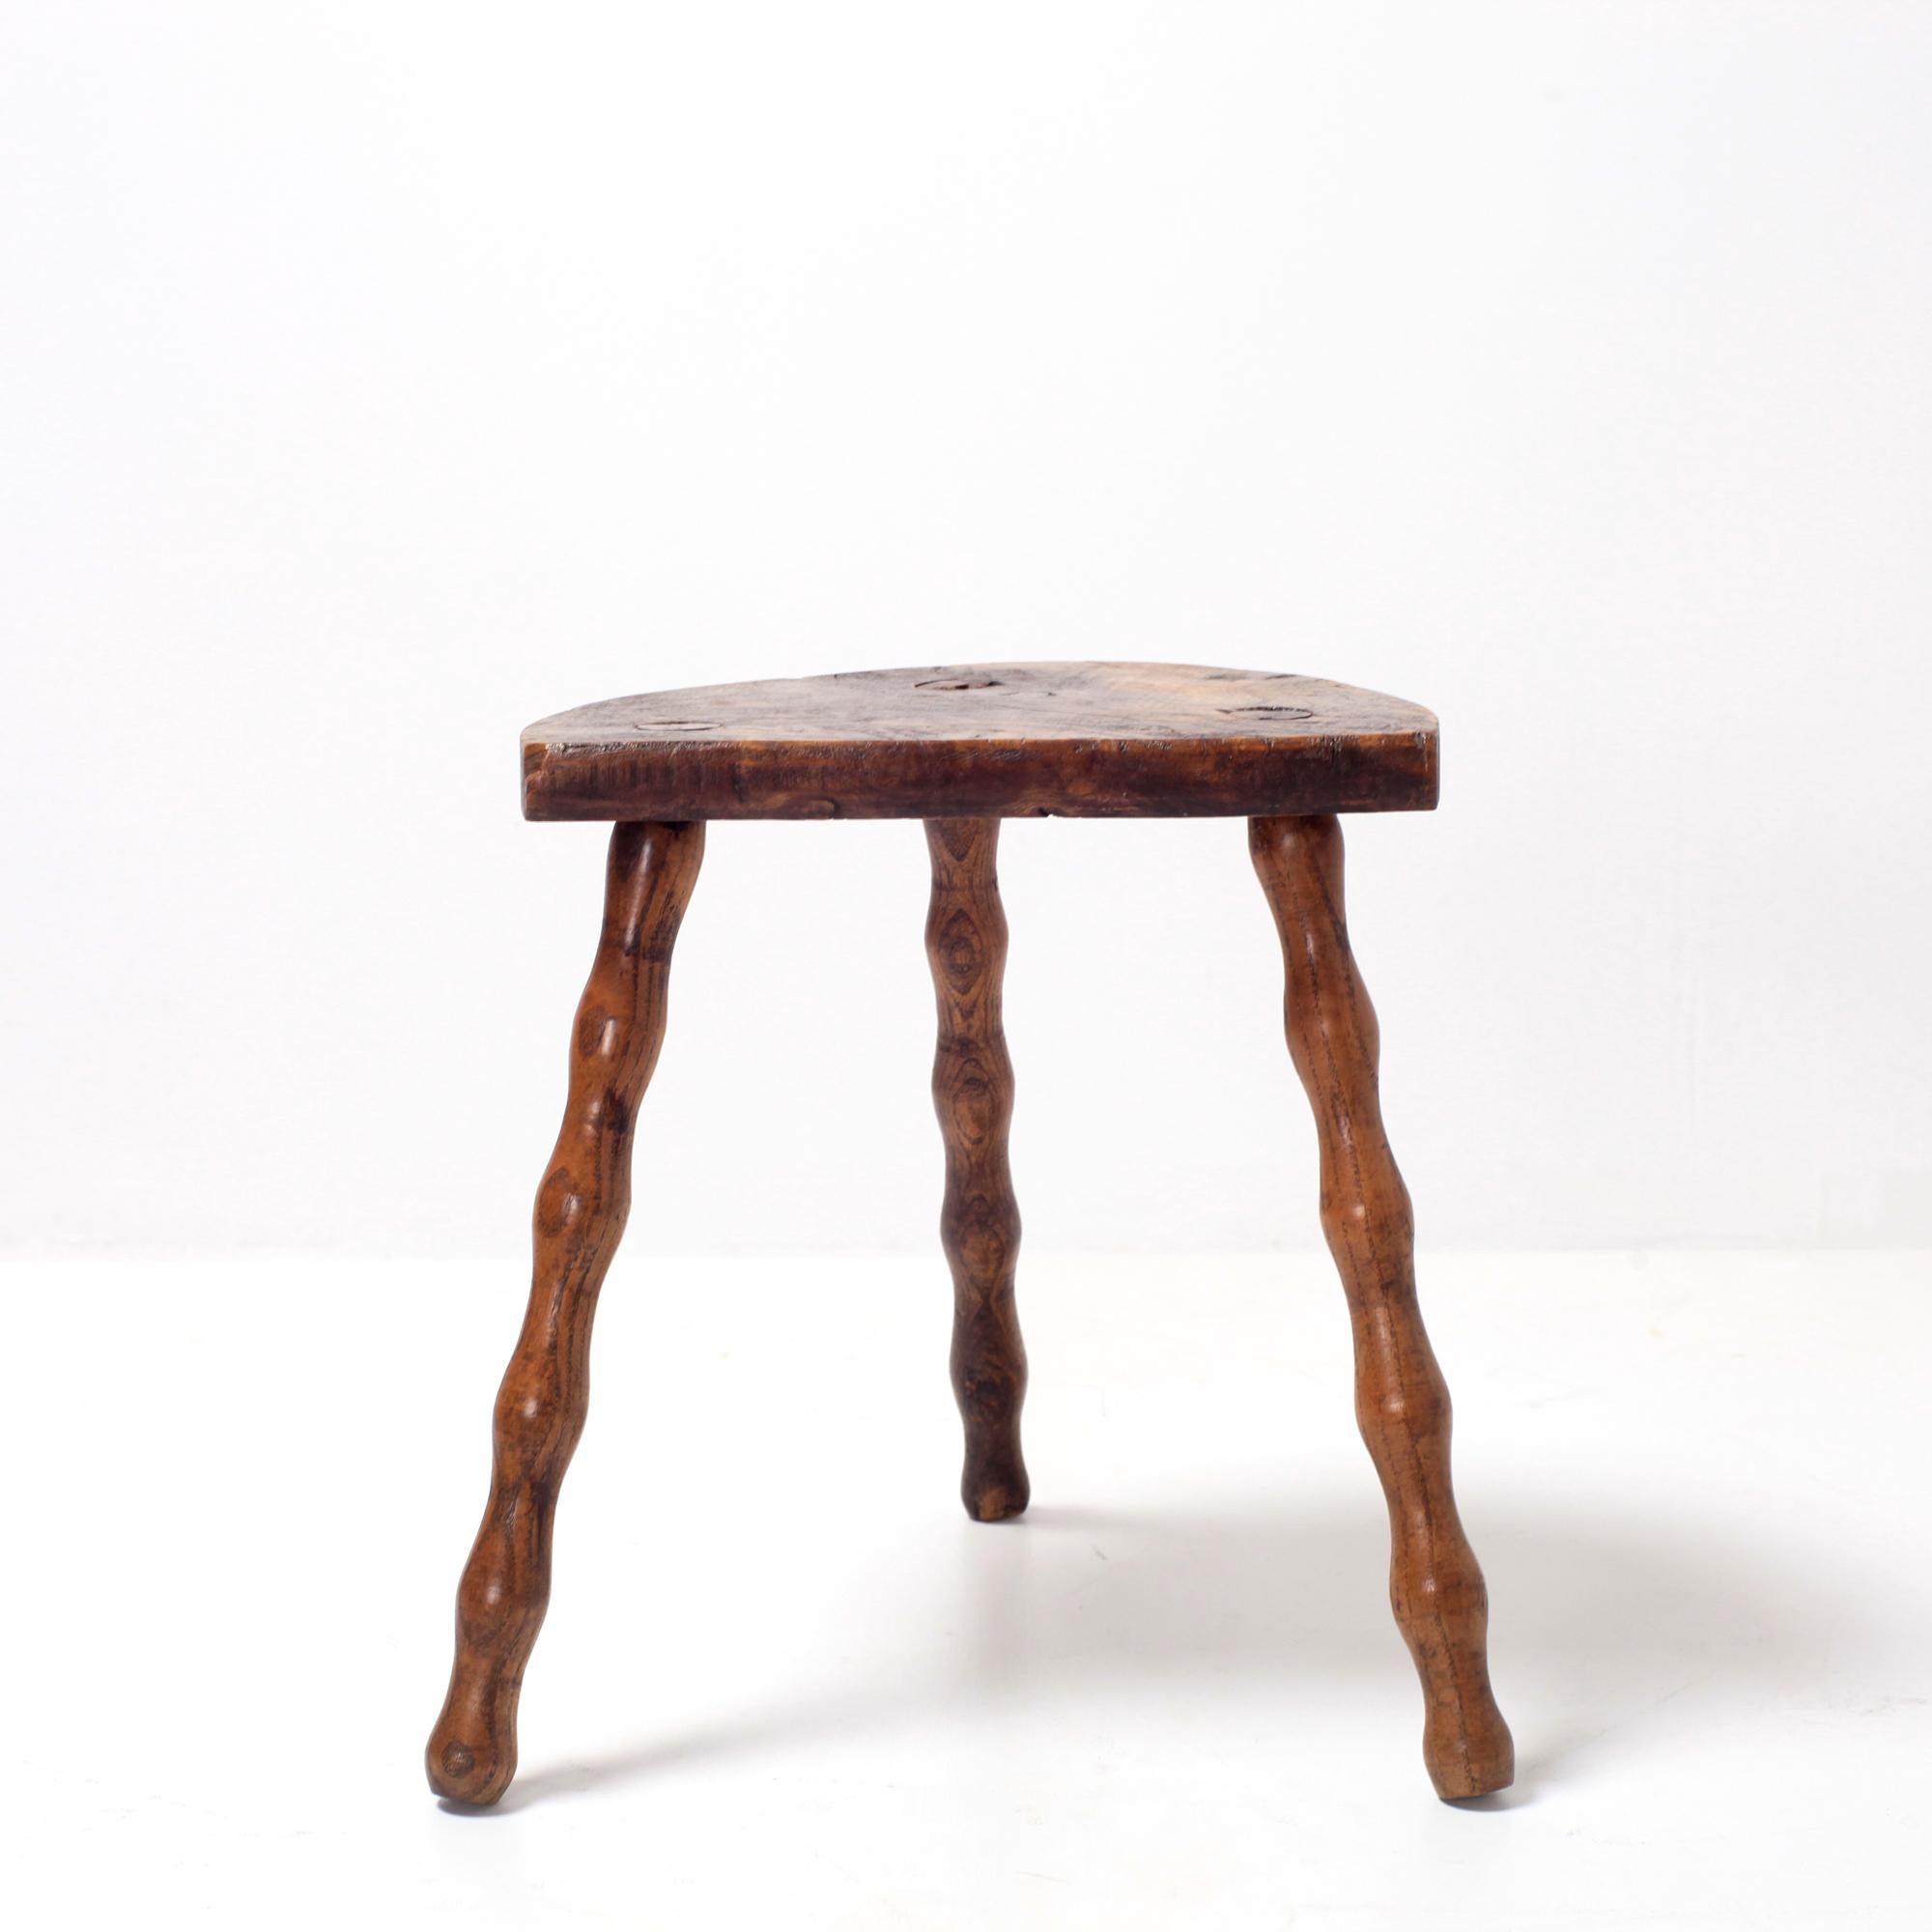 Handcrafted french brutalist solid wood tripod stool or side table
Turned wooden base
No nails or hardware
In the style of Jean Touret, Charlotte Perriand, Francis Jourdain